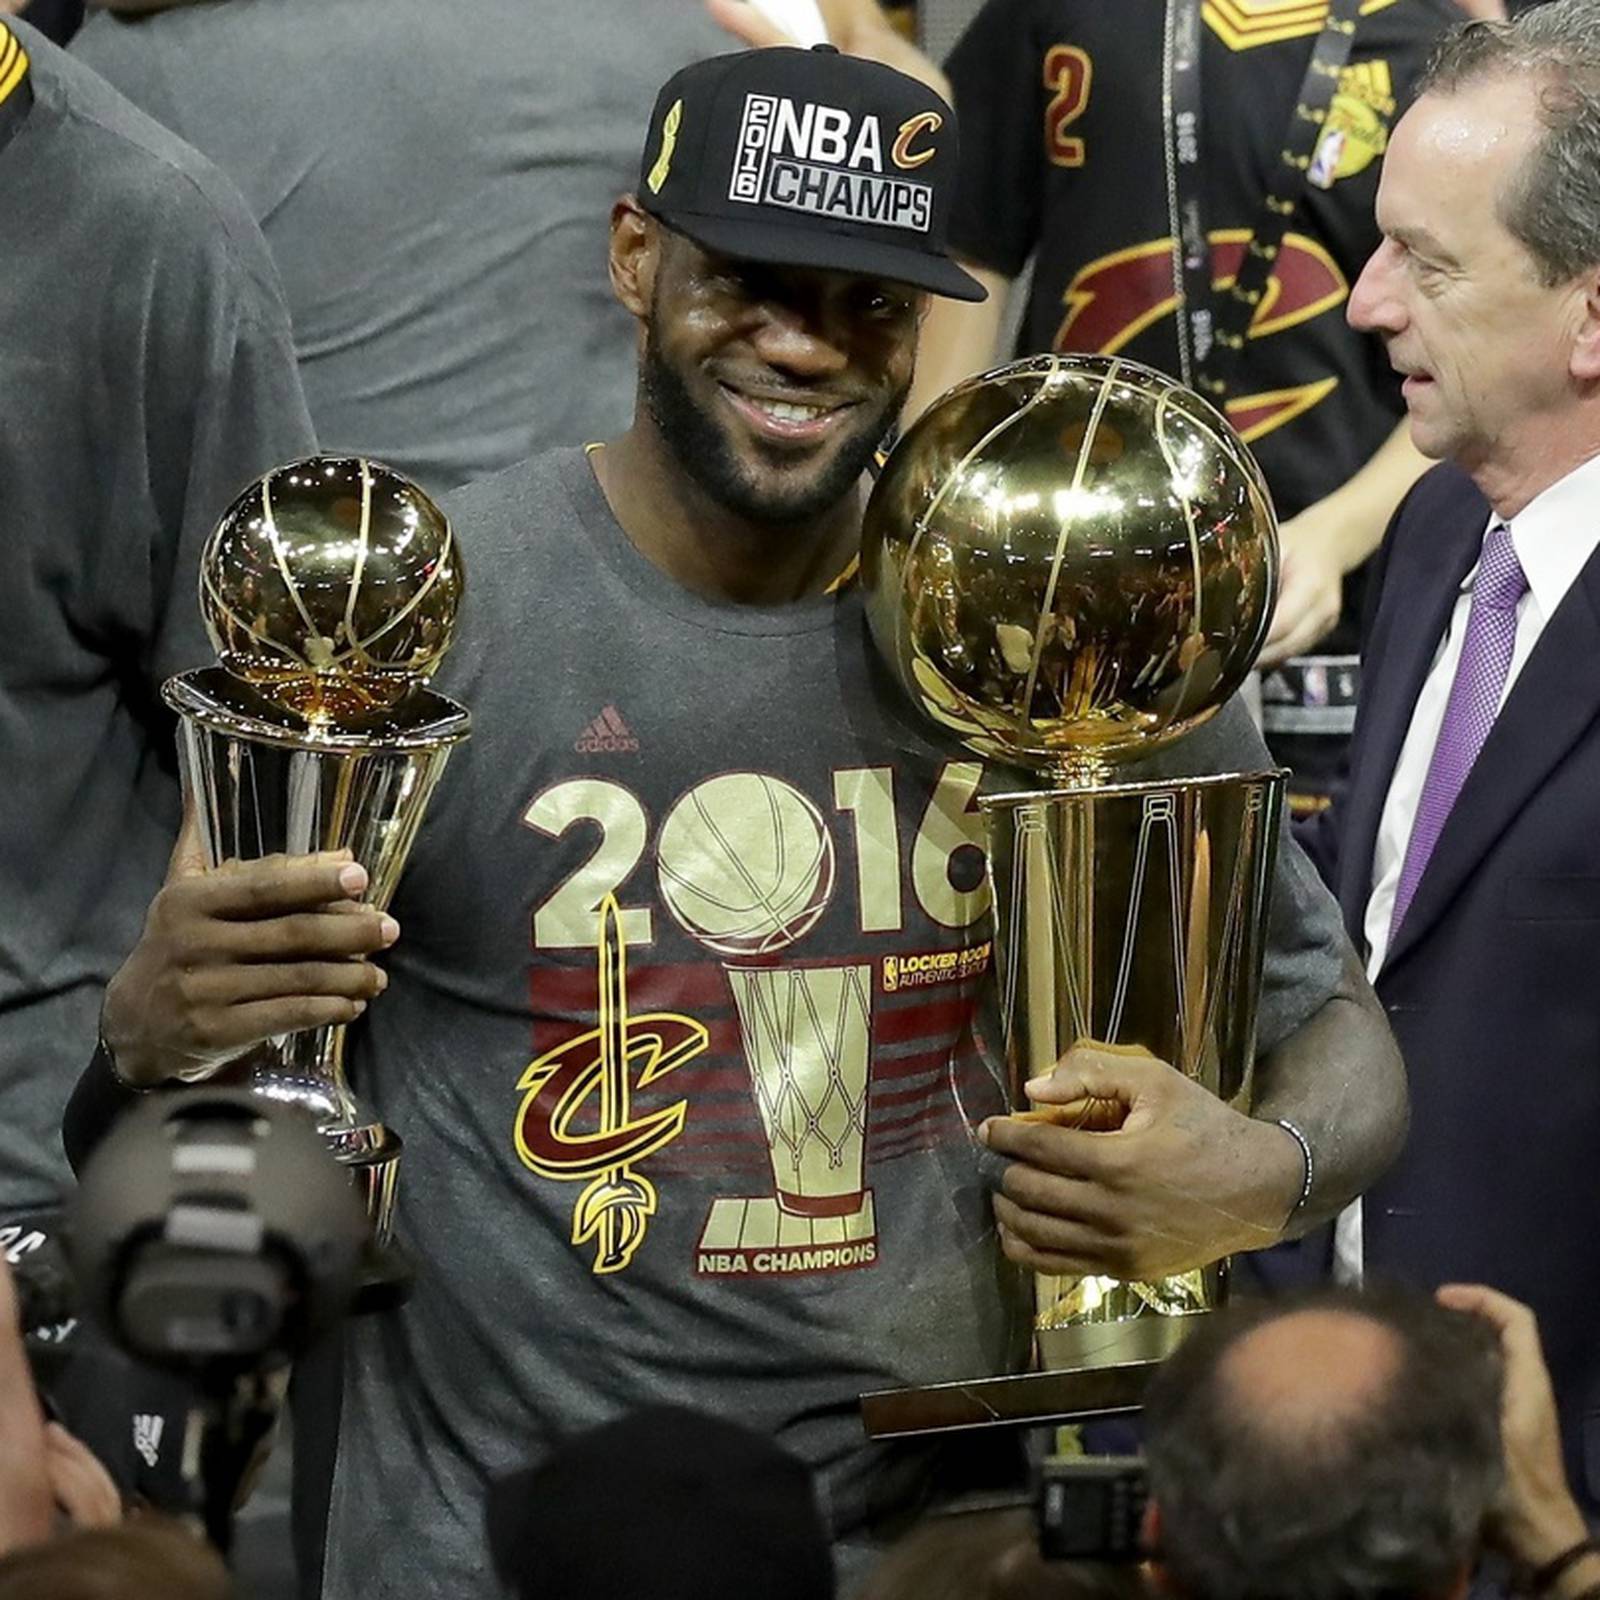 LeBron James delivered on a promise to Cleveland fans: PD 175